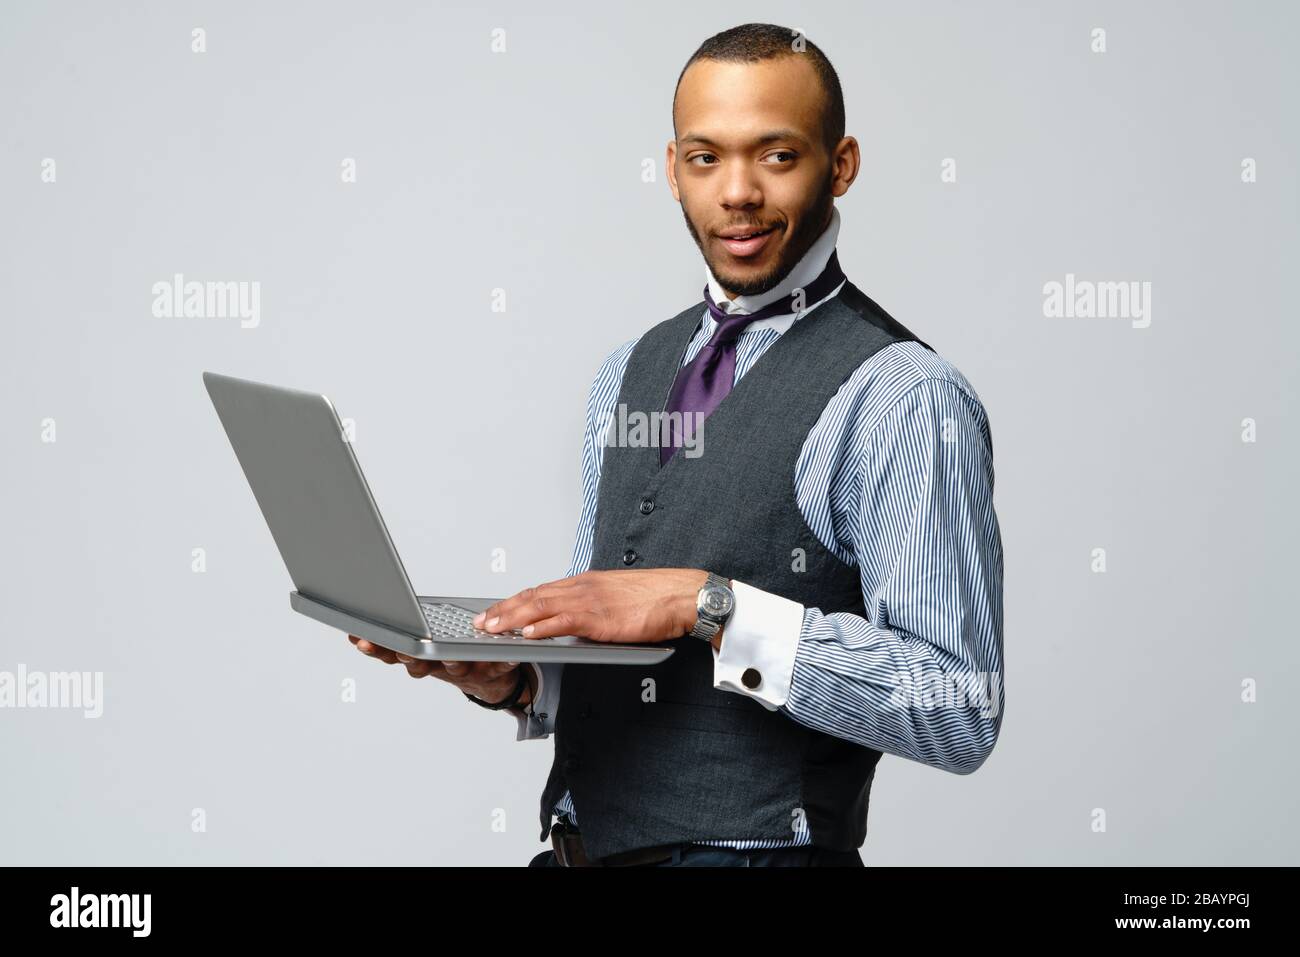 professional african-american business man holding laptop computer Stock Photo